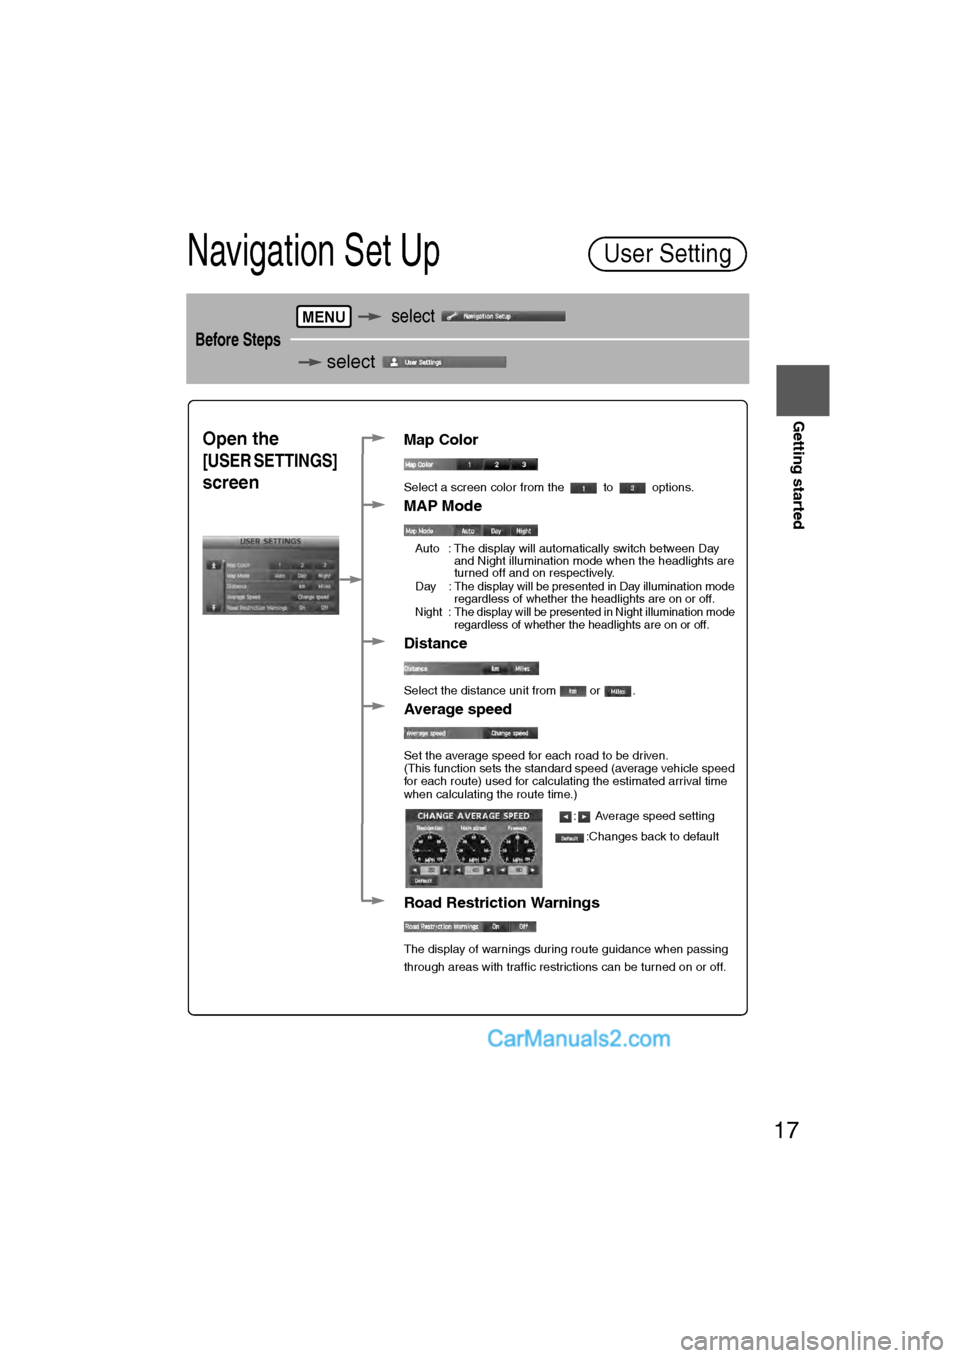 MAZDA MODEL CX-9 2009  Navigation Manual (in English) 17
Getting started
Navigation Set Up
Before Steps
   select
  select   
User Setting
MENU
Open the 
[USER SETTINGS] 
screen
nMap Color
Select a screen color from the   to   options.
nMAP Mode
lAuto  :